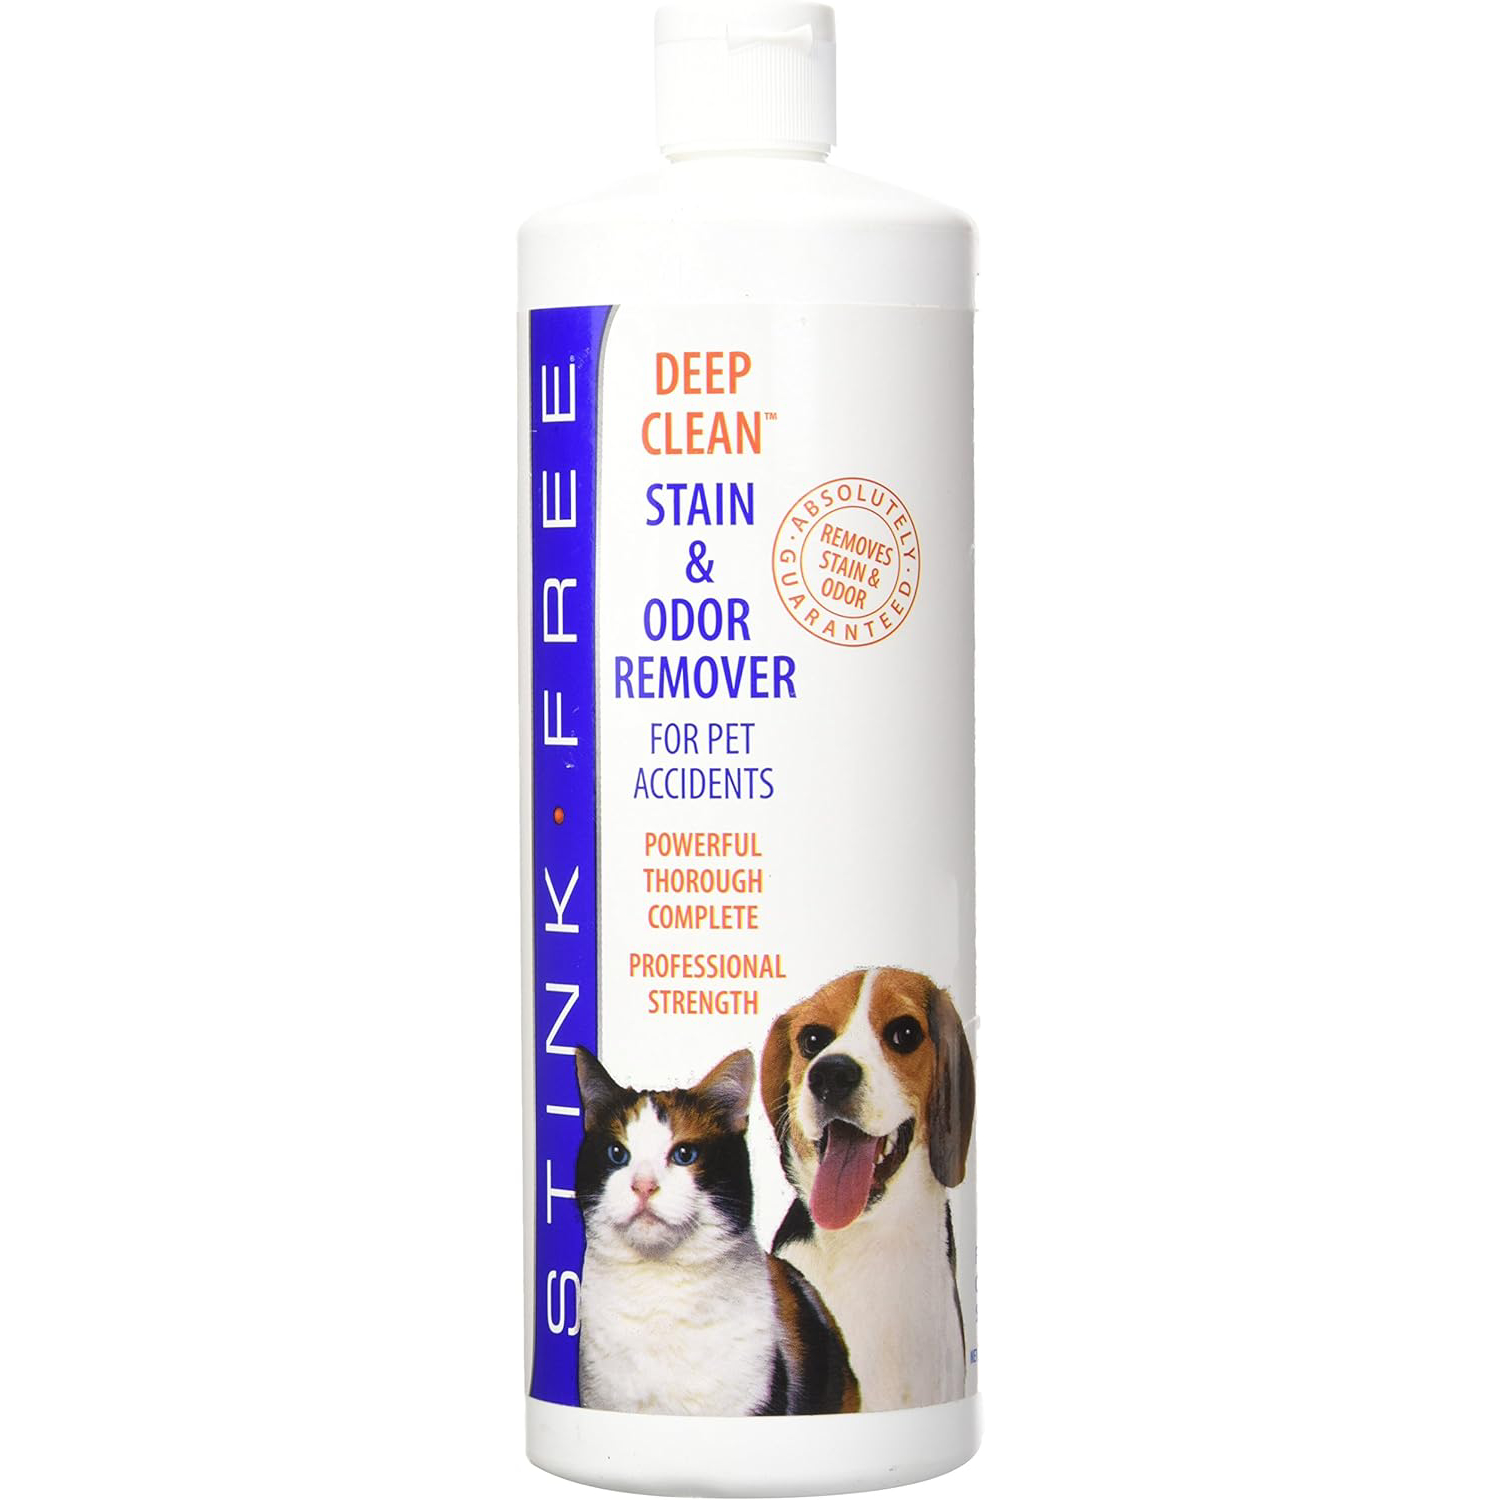 Deep Clean Stain and Odor Remover for Pet Accidents